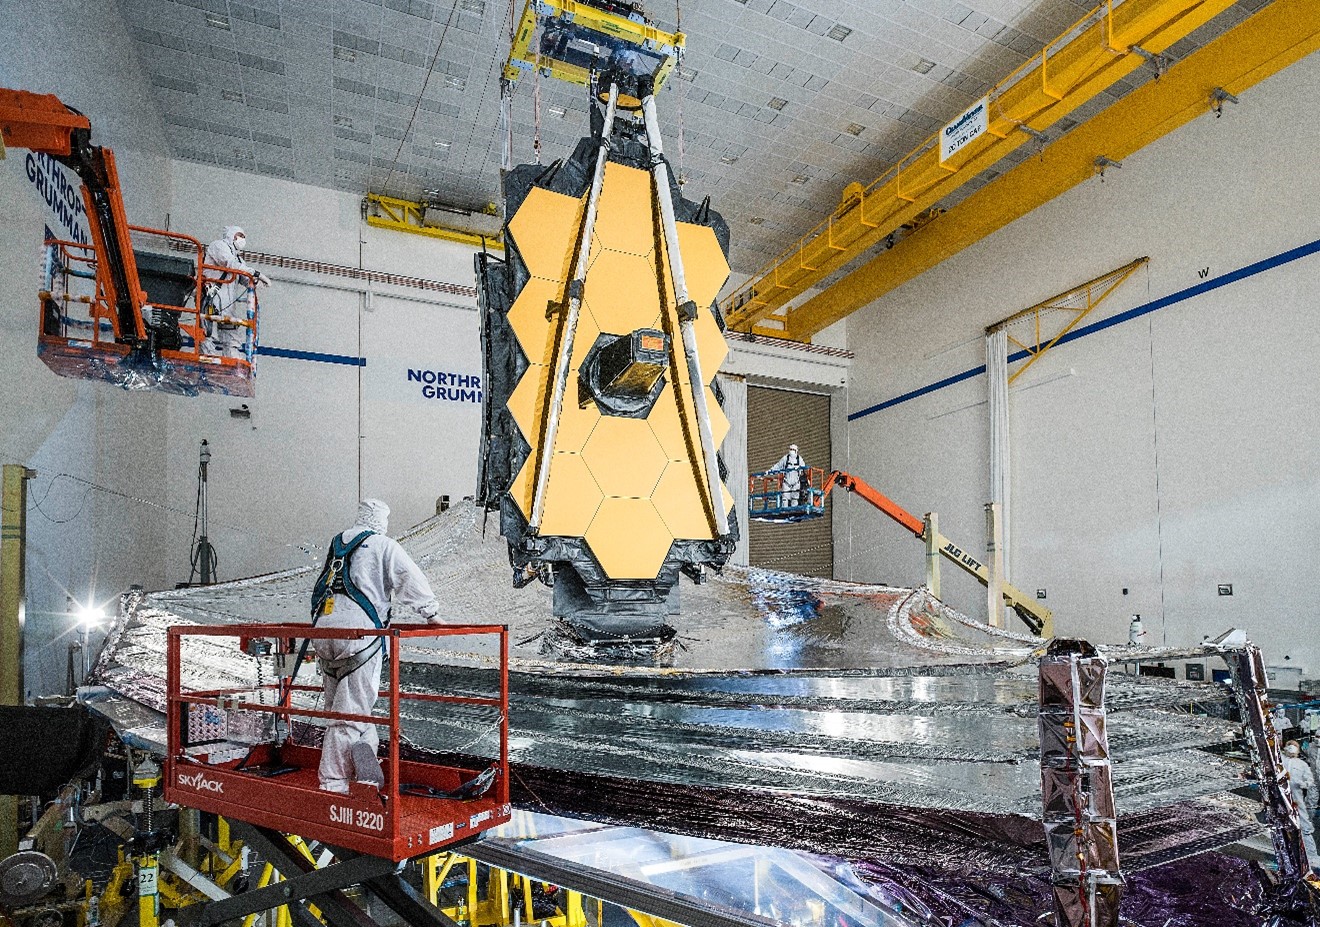 For the last time on Earth, the James Webb Space Telescope’s sunshield was deployed and tensioned by testing teams at Northrop Grumman in Redondo Beach, California where final deployment tests were completed. (Photo Credit: NASA/Chris Gunn)